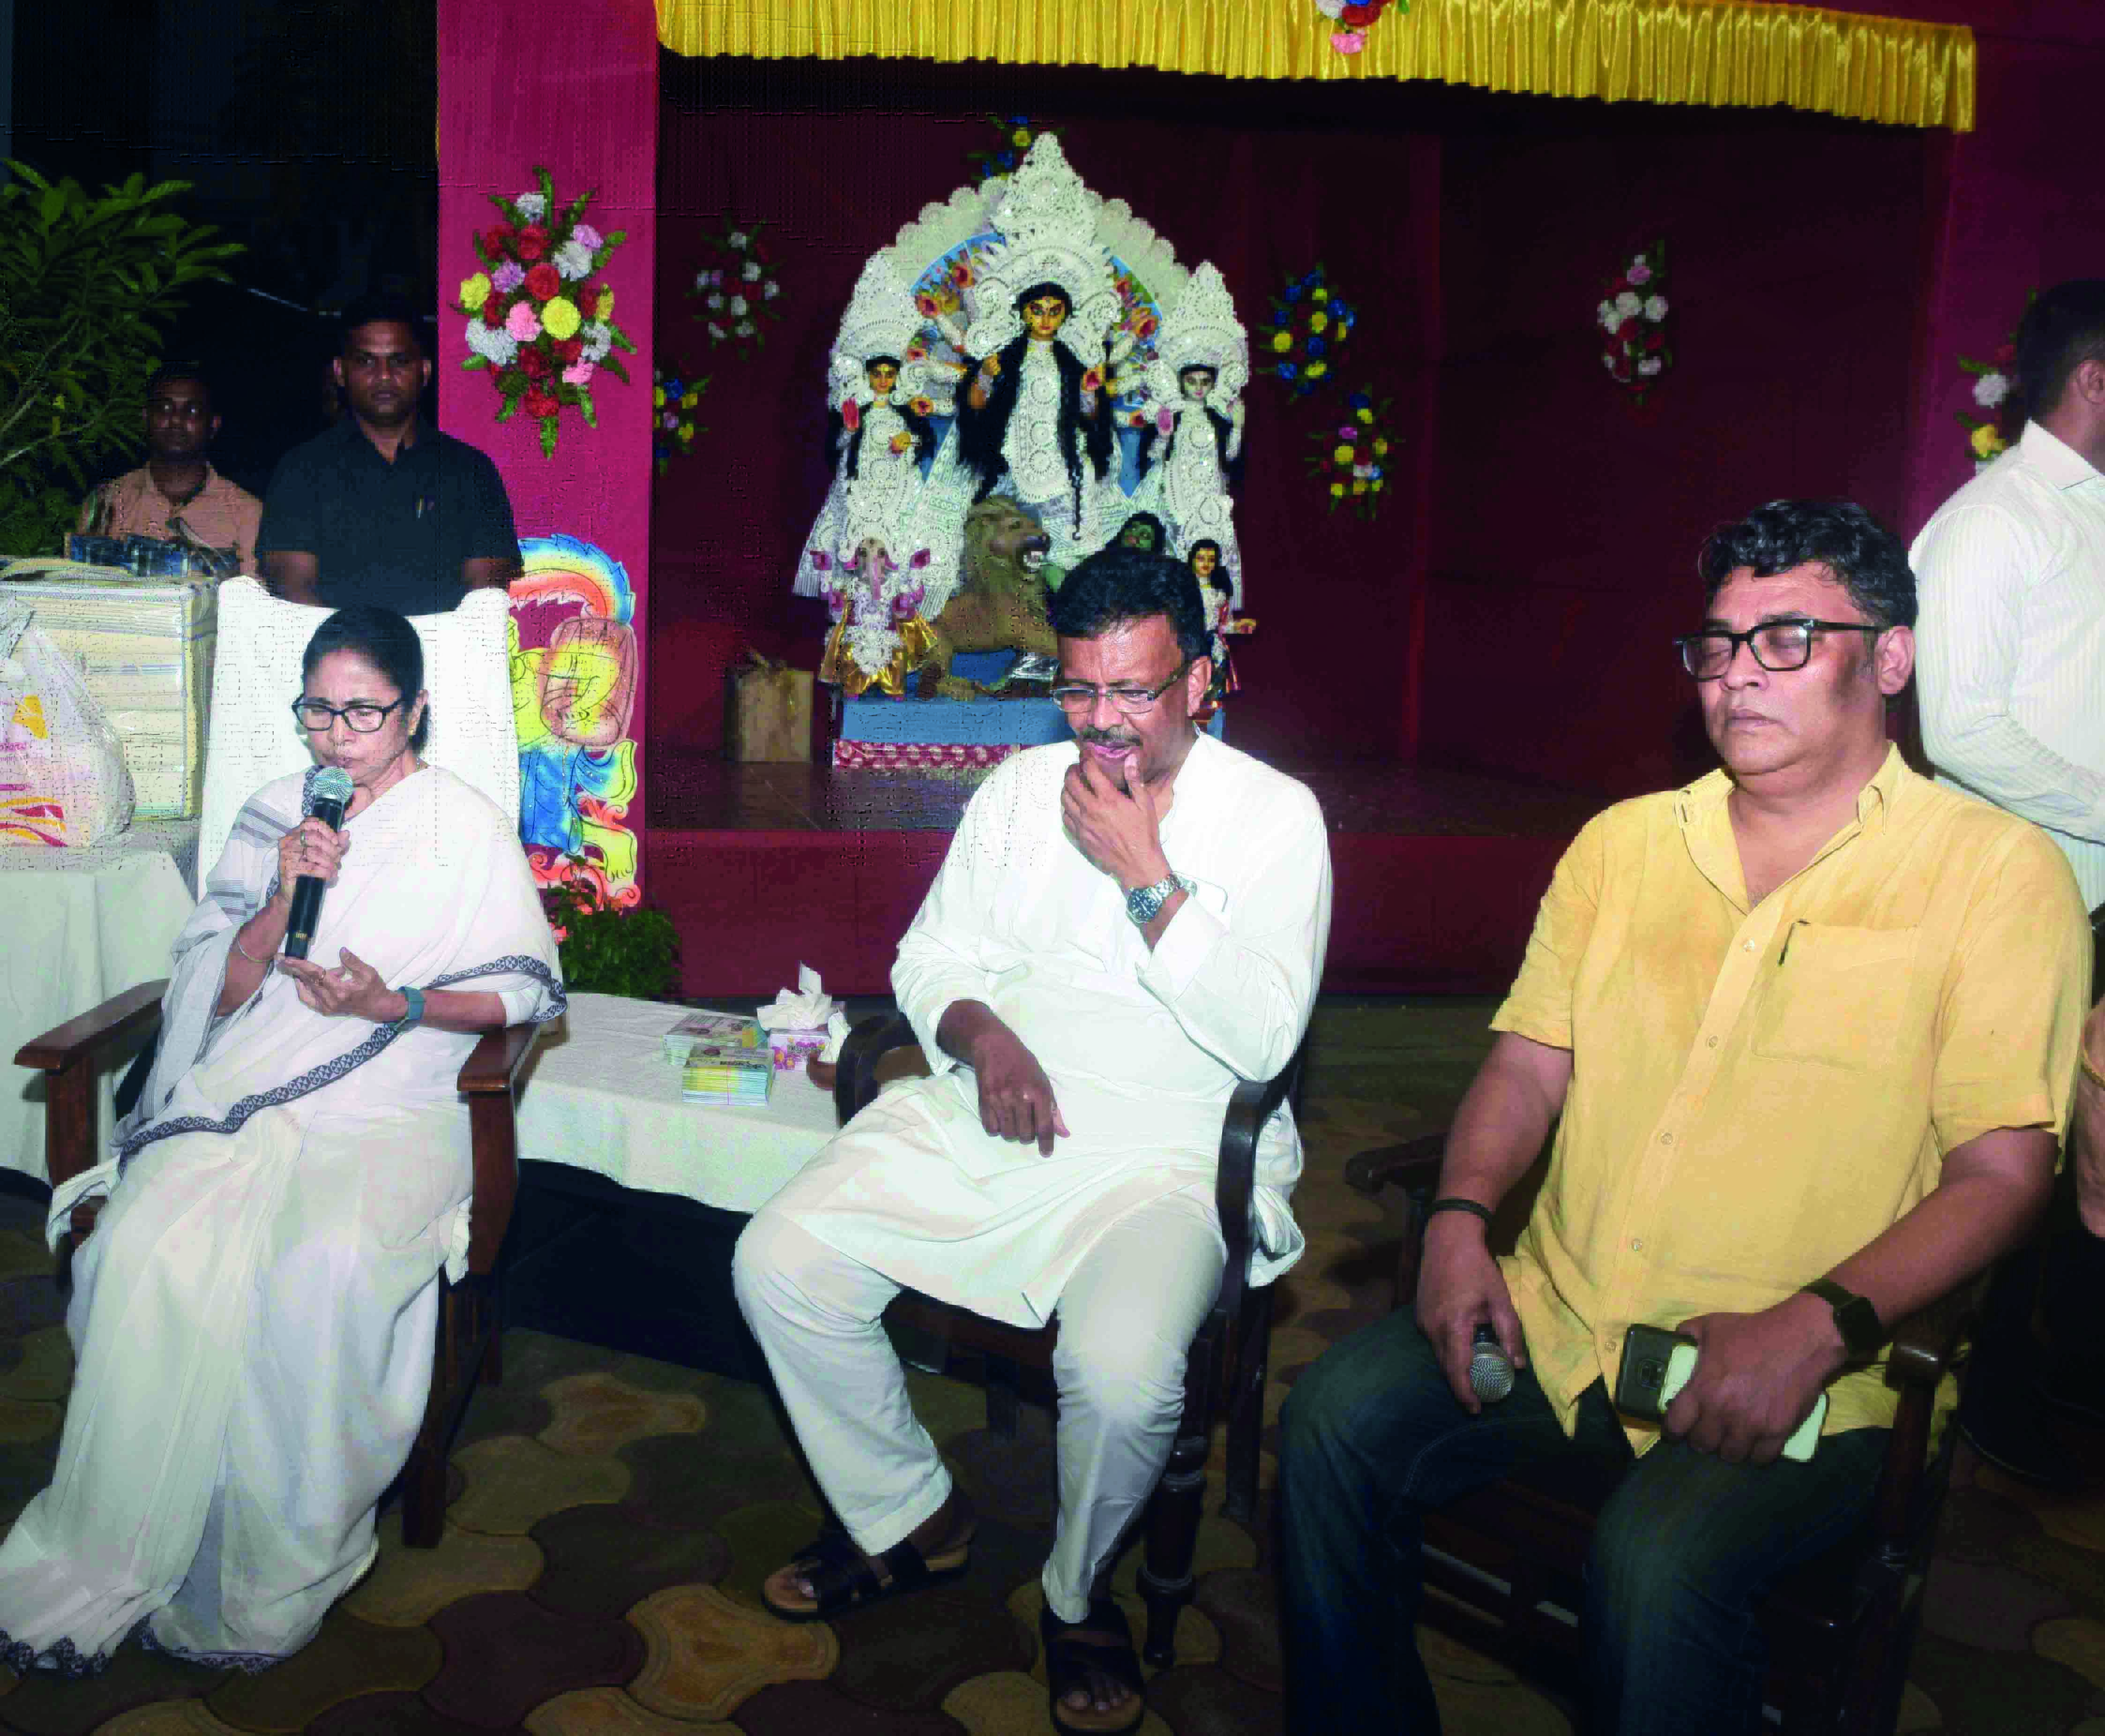 Happy to see people smiling: CM greets all on Chaturthi